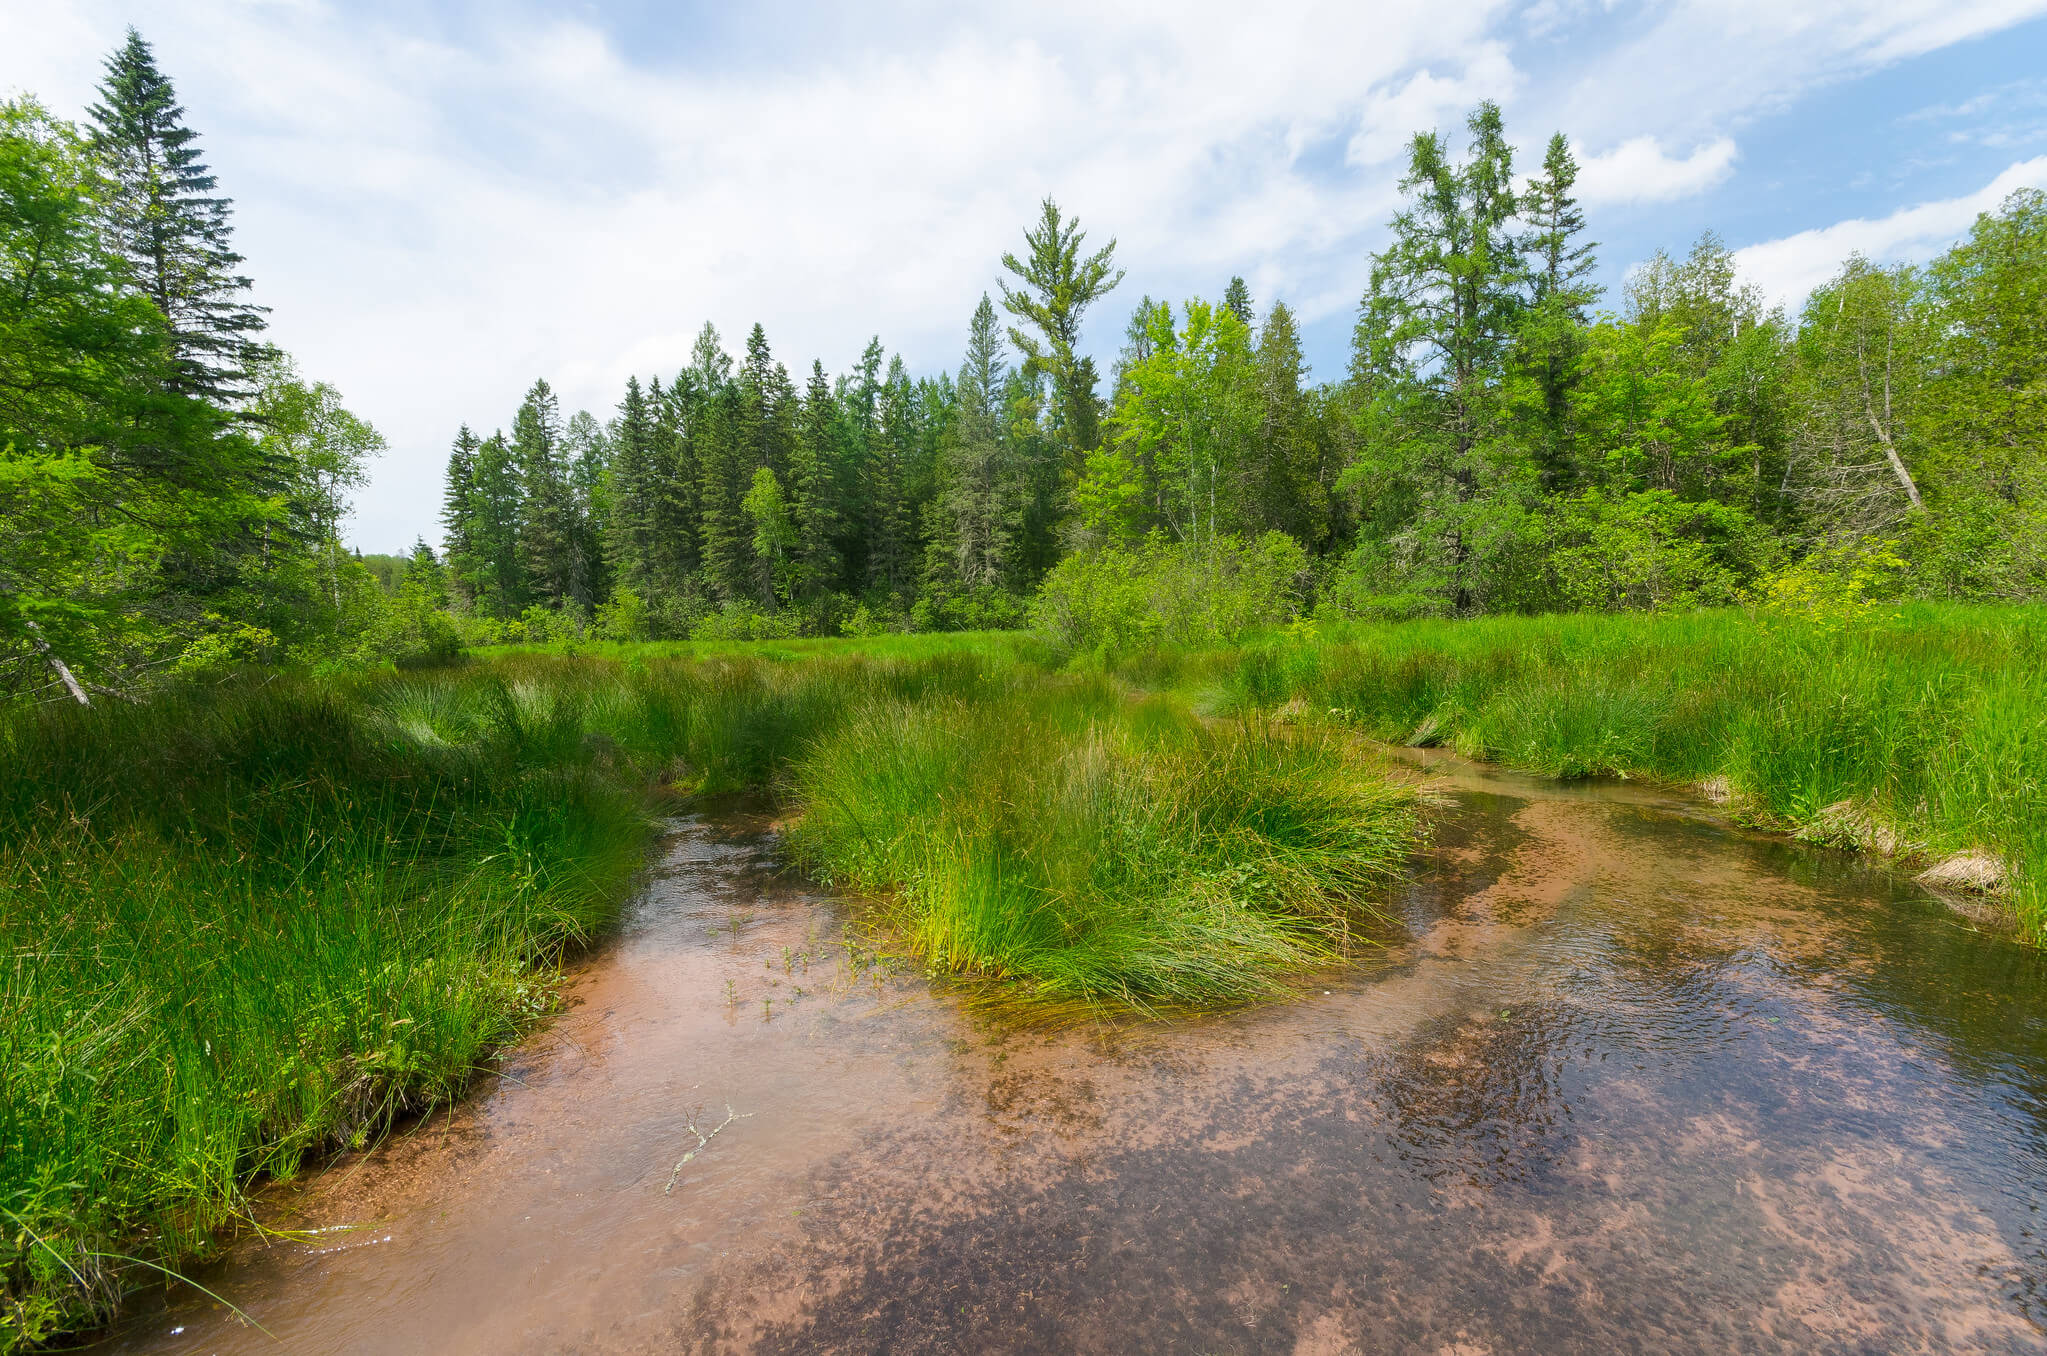 A trout stream in Wisconsin with a shallow bank leading into a marshy wetland surrounded by bright green grasses and trees.